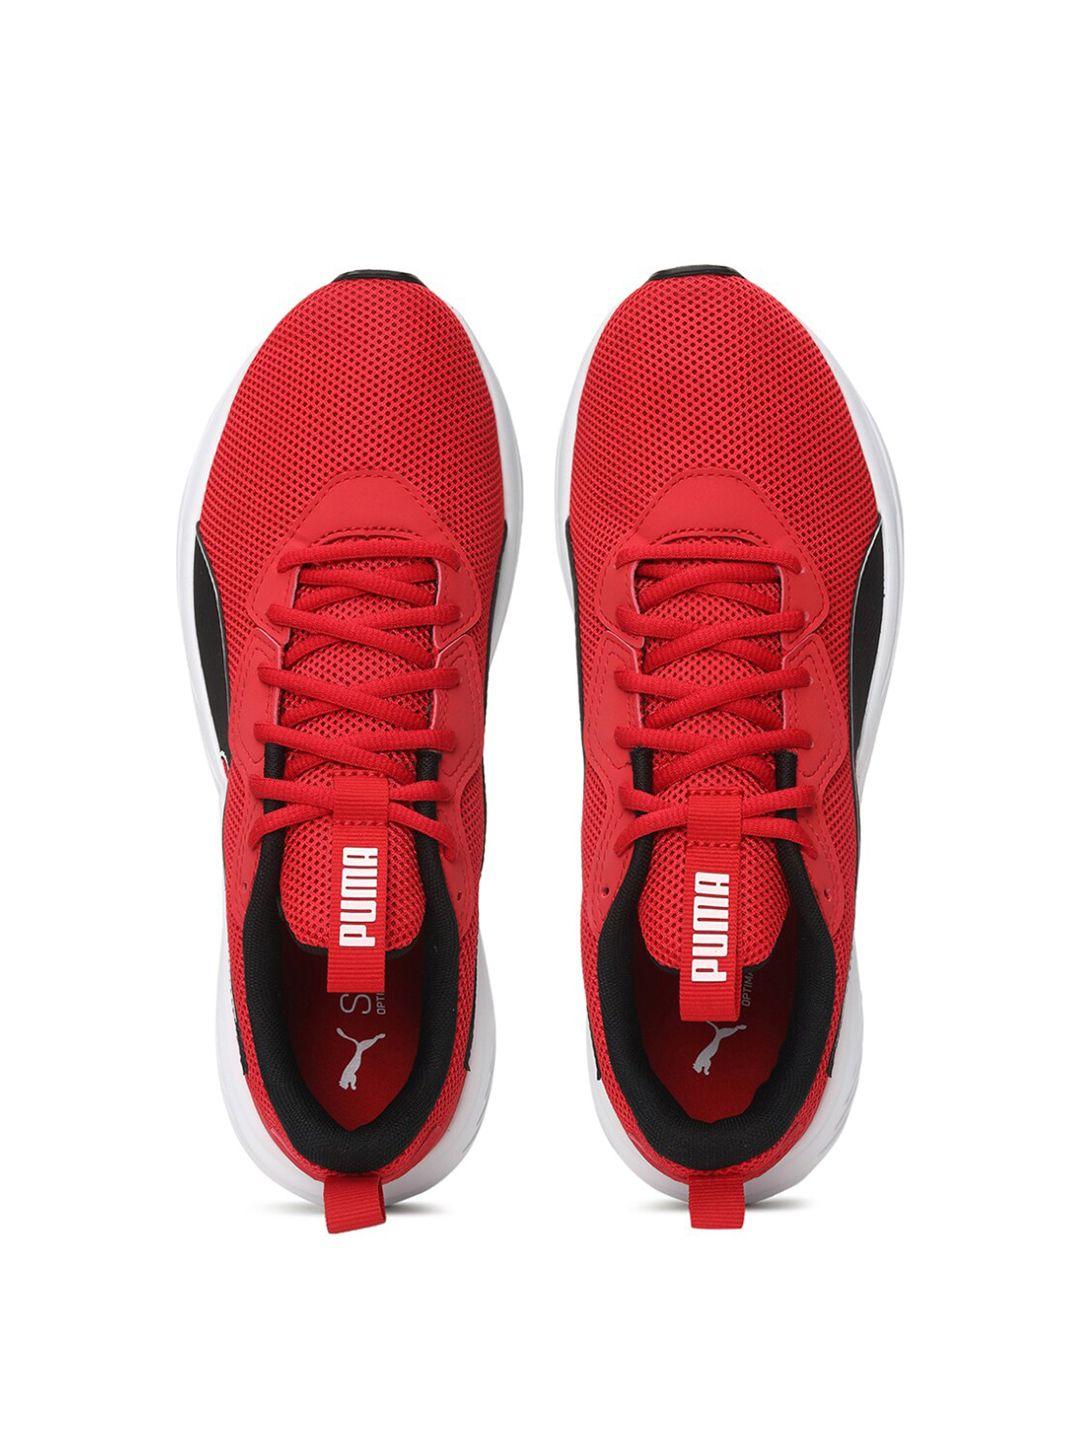 puma-unisex-red-textile-running-shoes